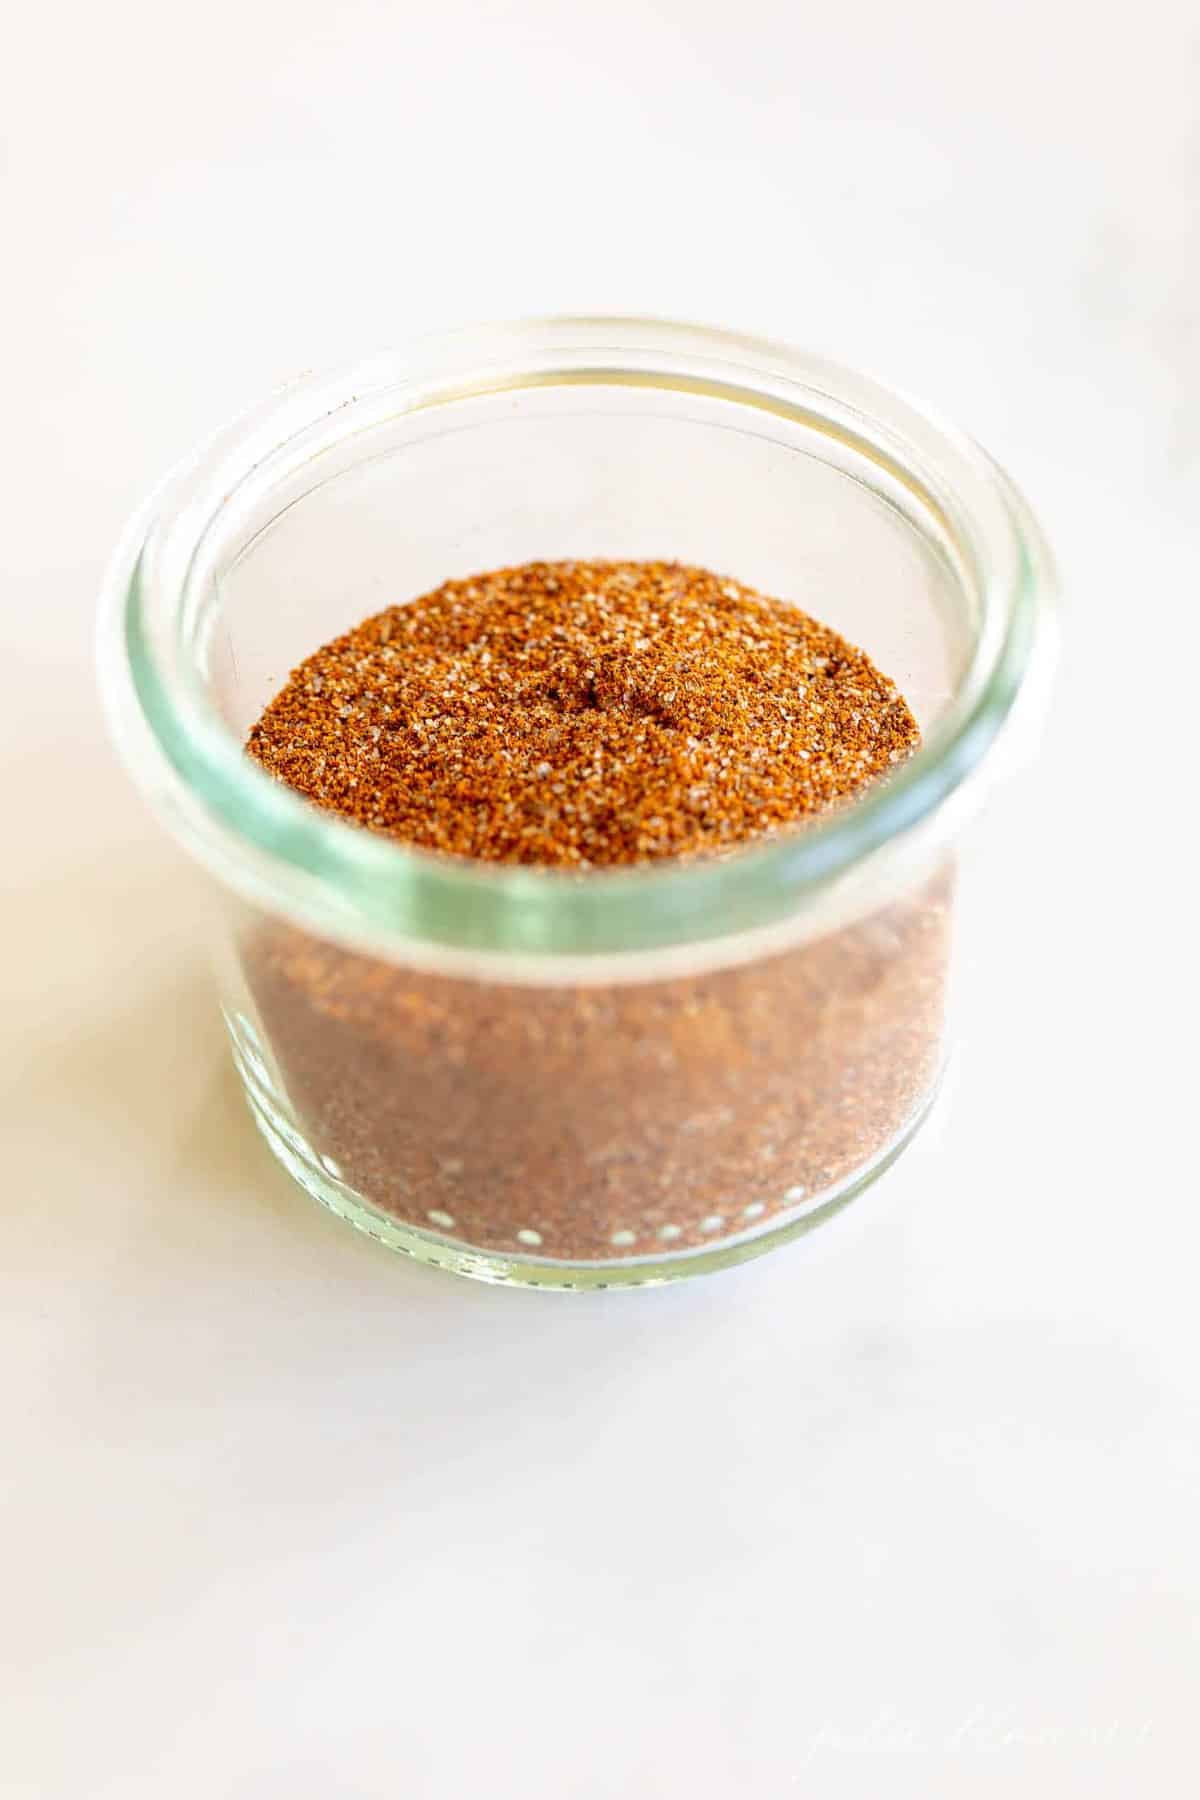 A marble surface with a clear glass jar full of homemade fajita seasoning mix.